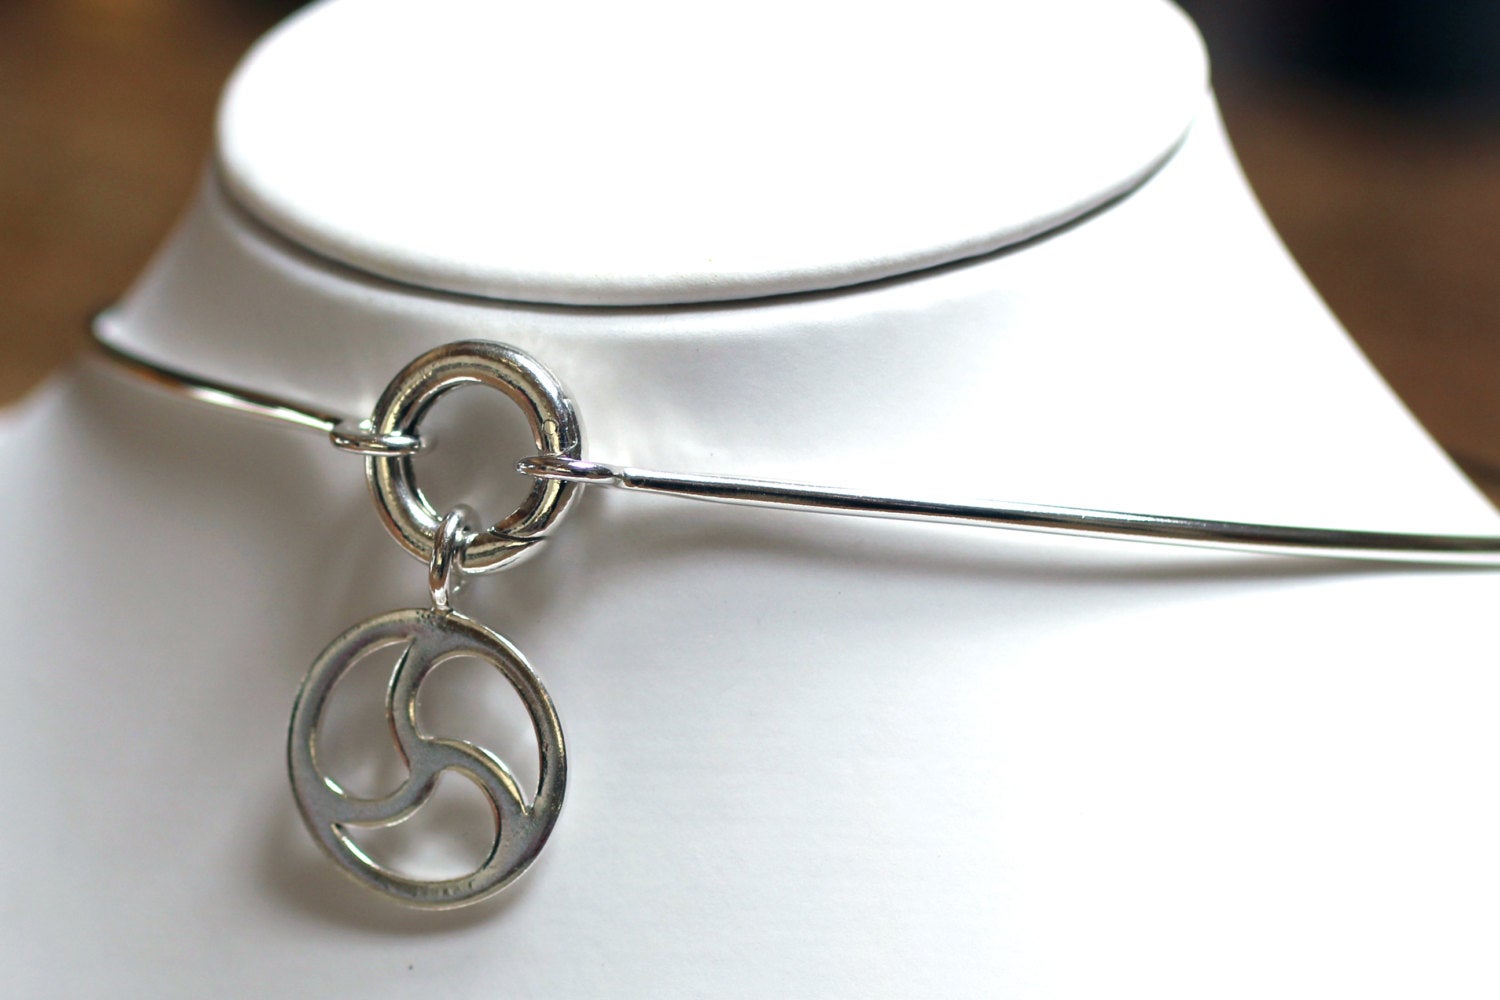 Sterling Silver Day Collar with Concealed Closing and BDSM Triskele Pendant